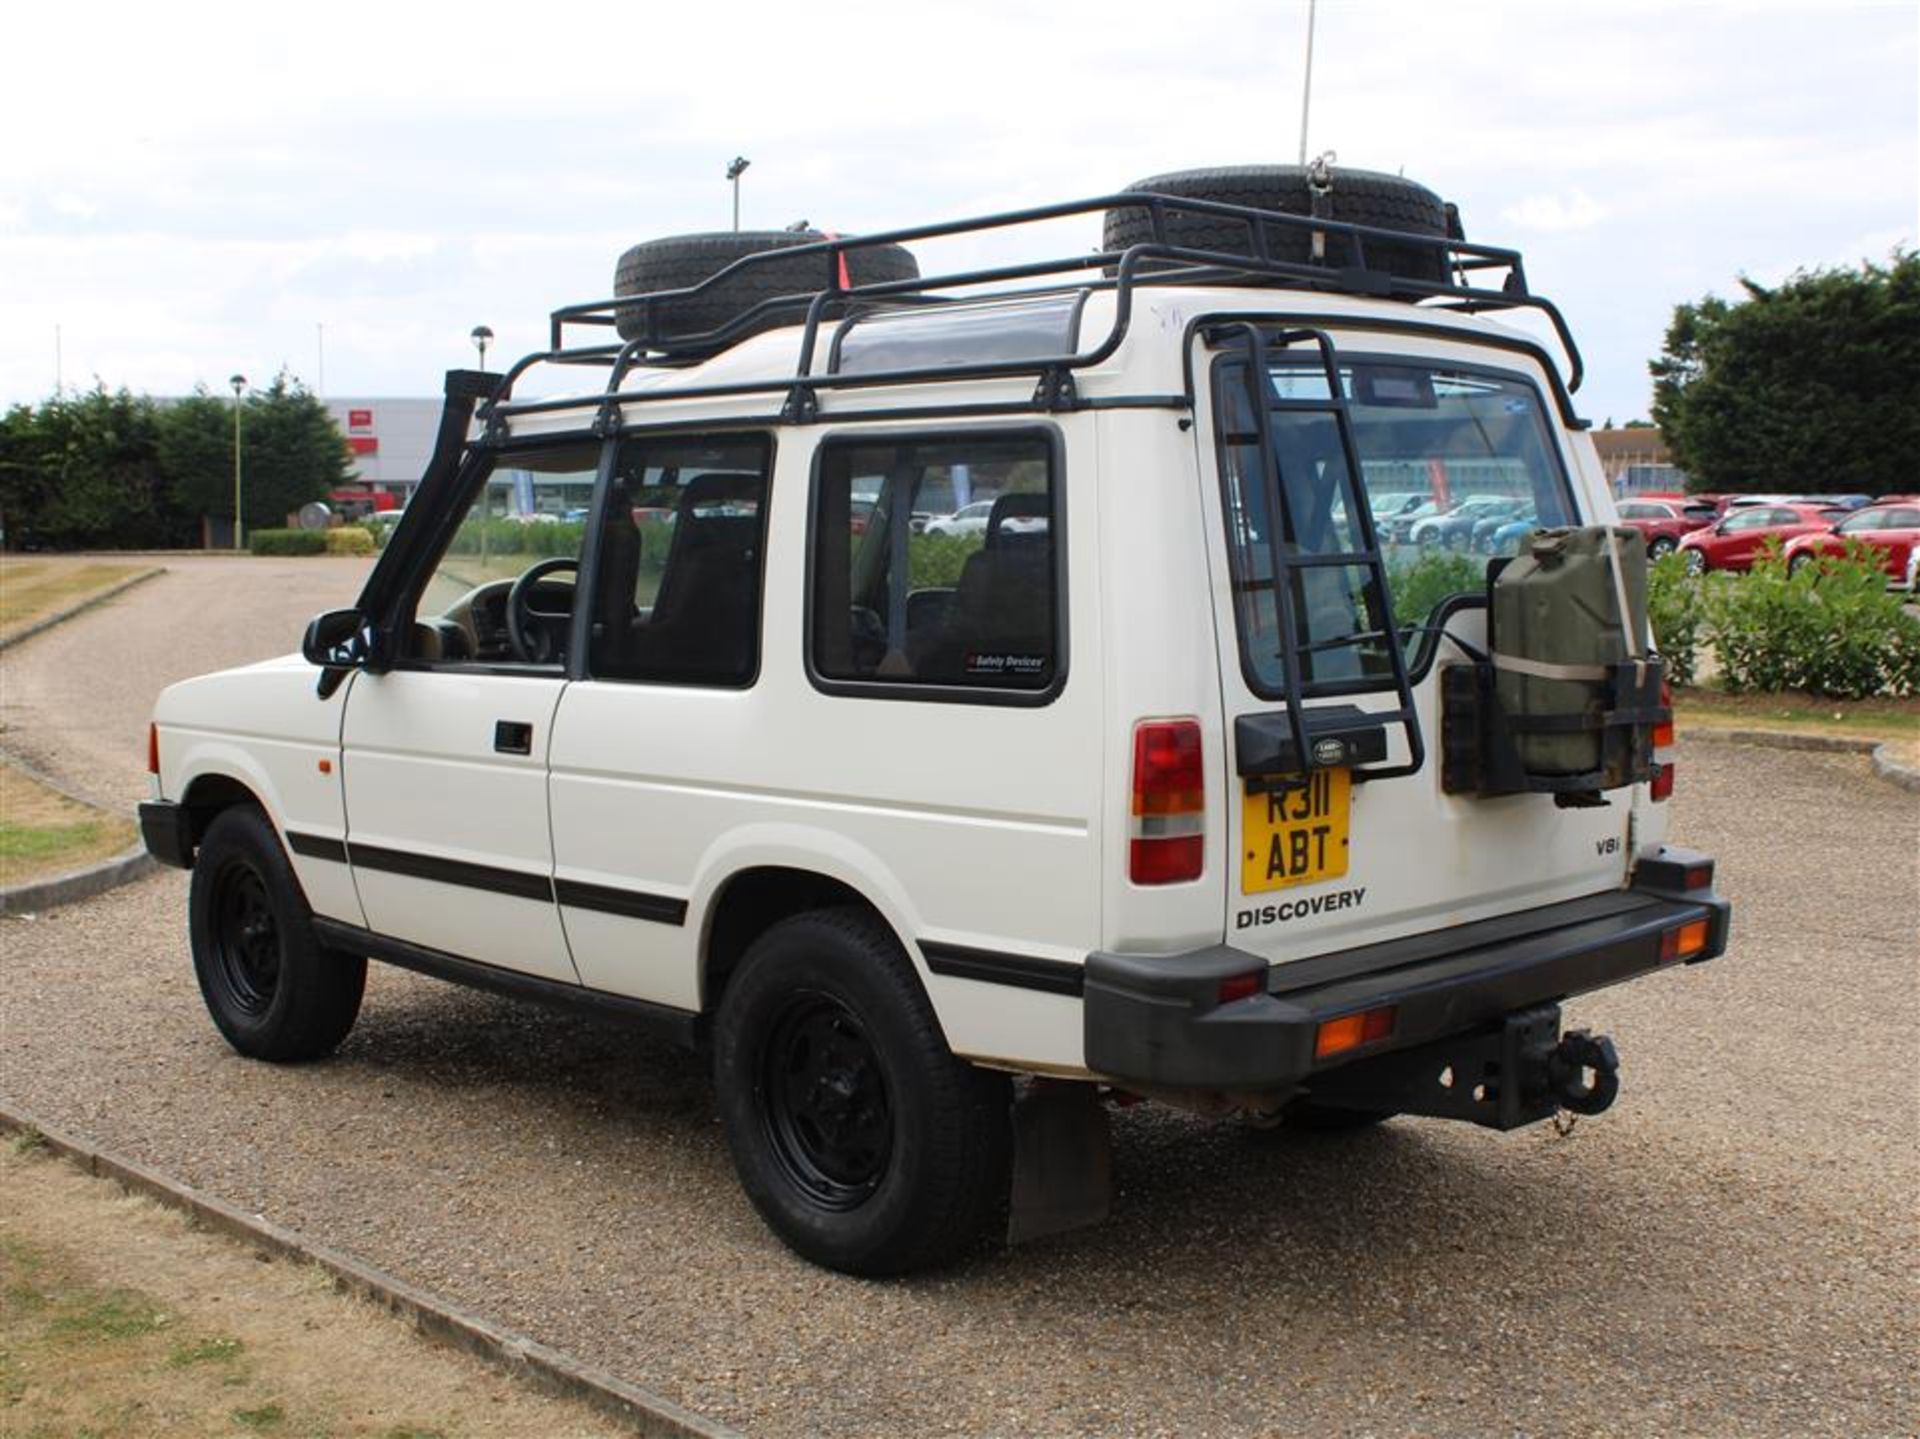 1998 Land Rover DiscoverySeries I 3.9 V8i LHD - Image 12 of 24